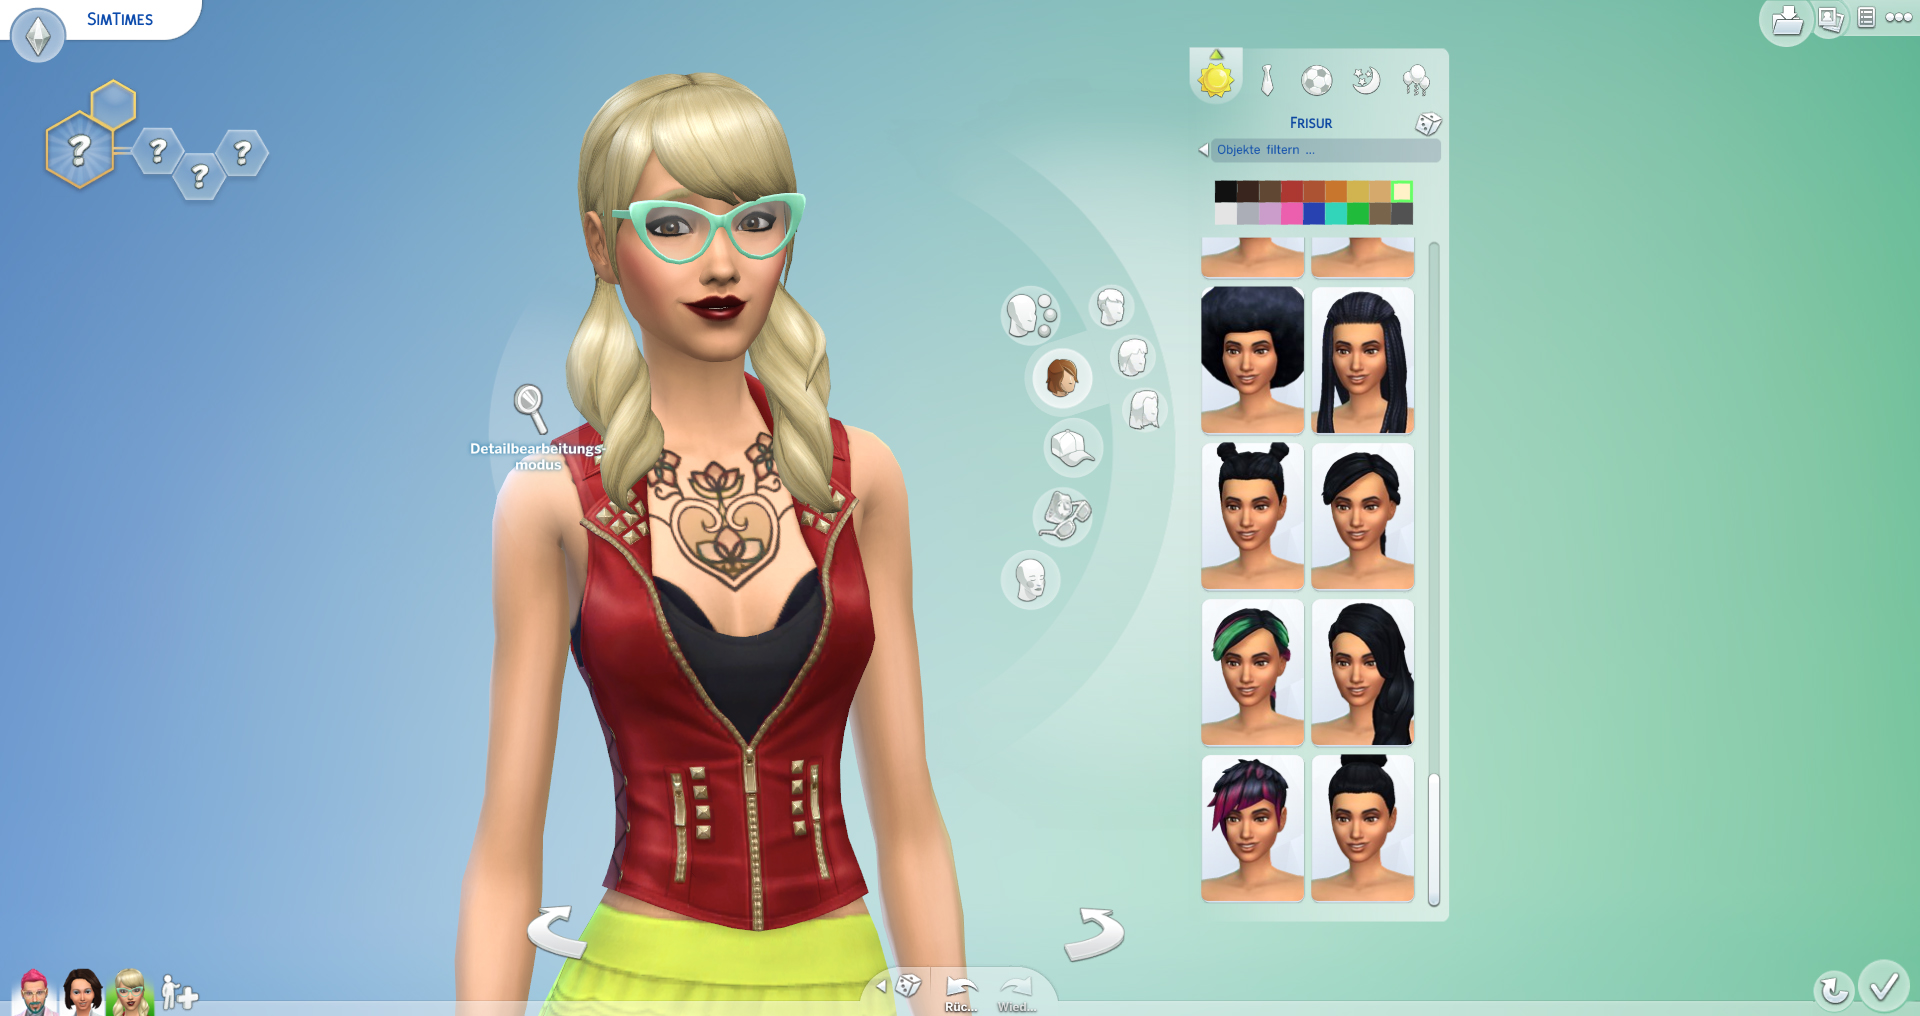 sims 4 nude in cas